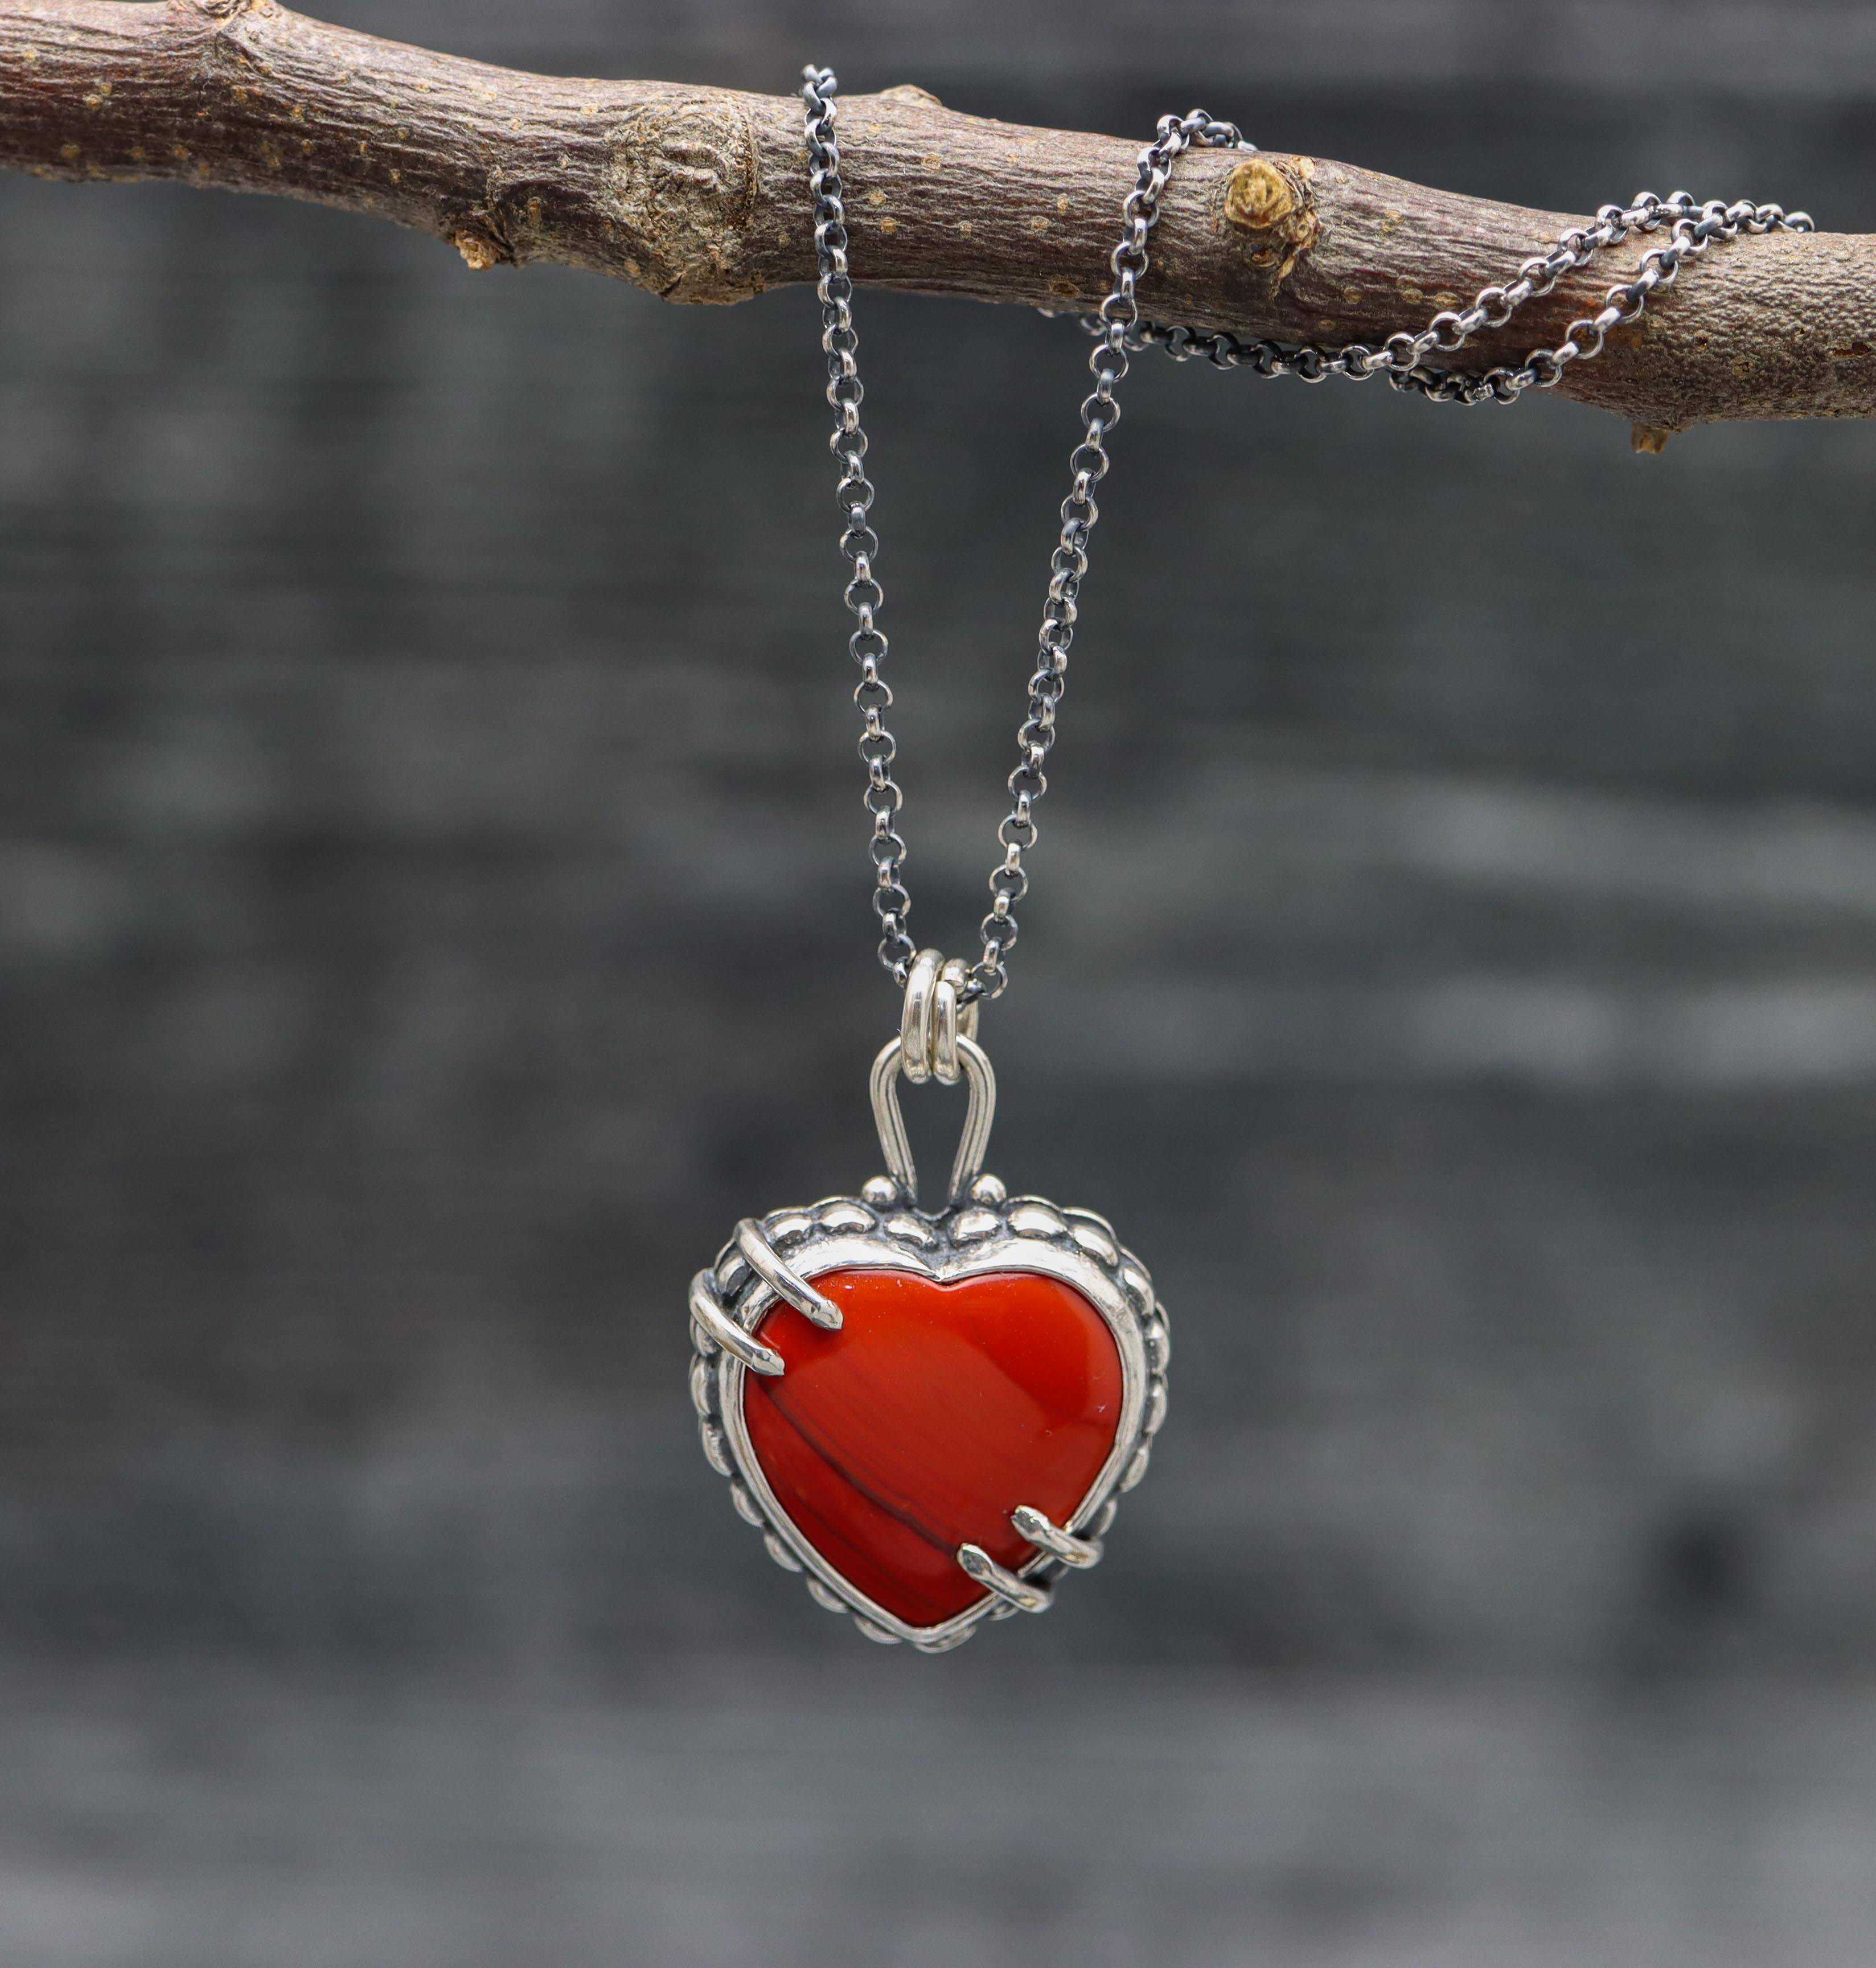 Red Rosarita Heart Pendant Necklace Sterling Silver